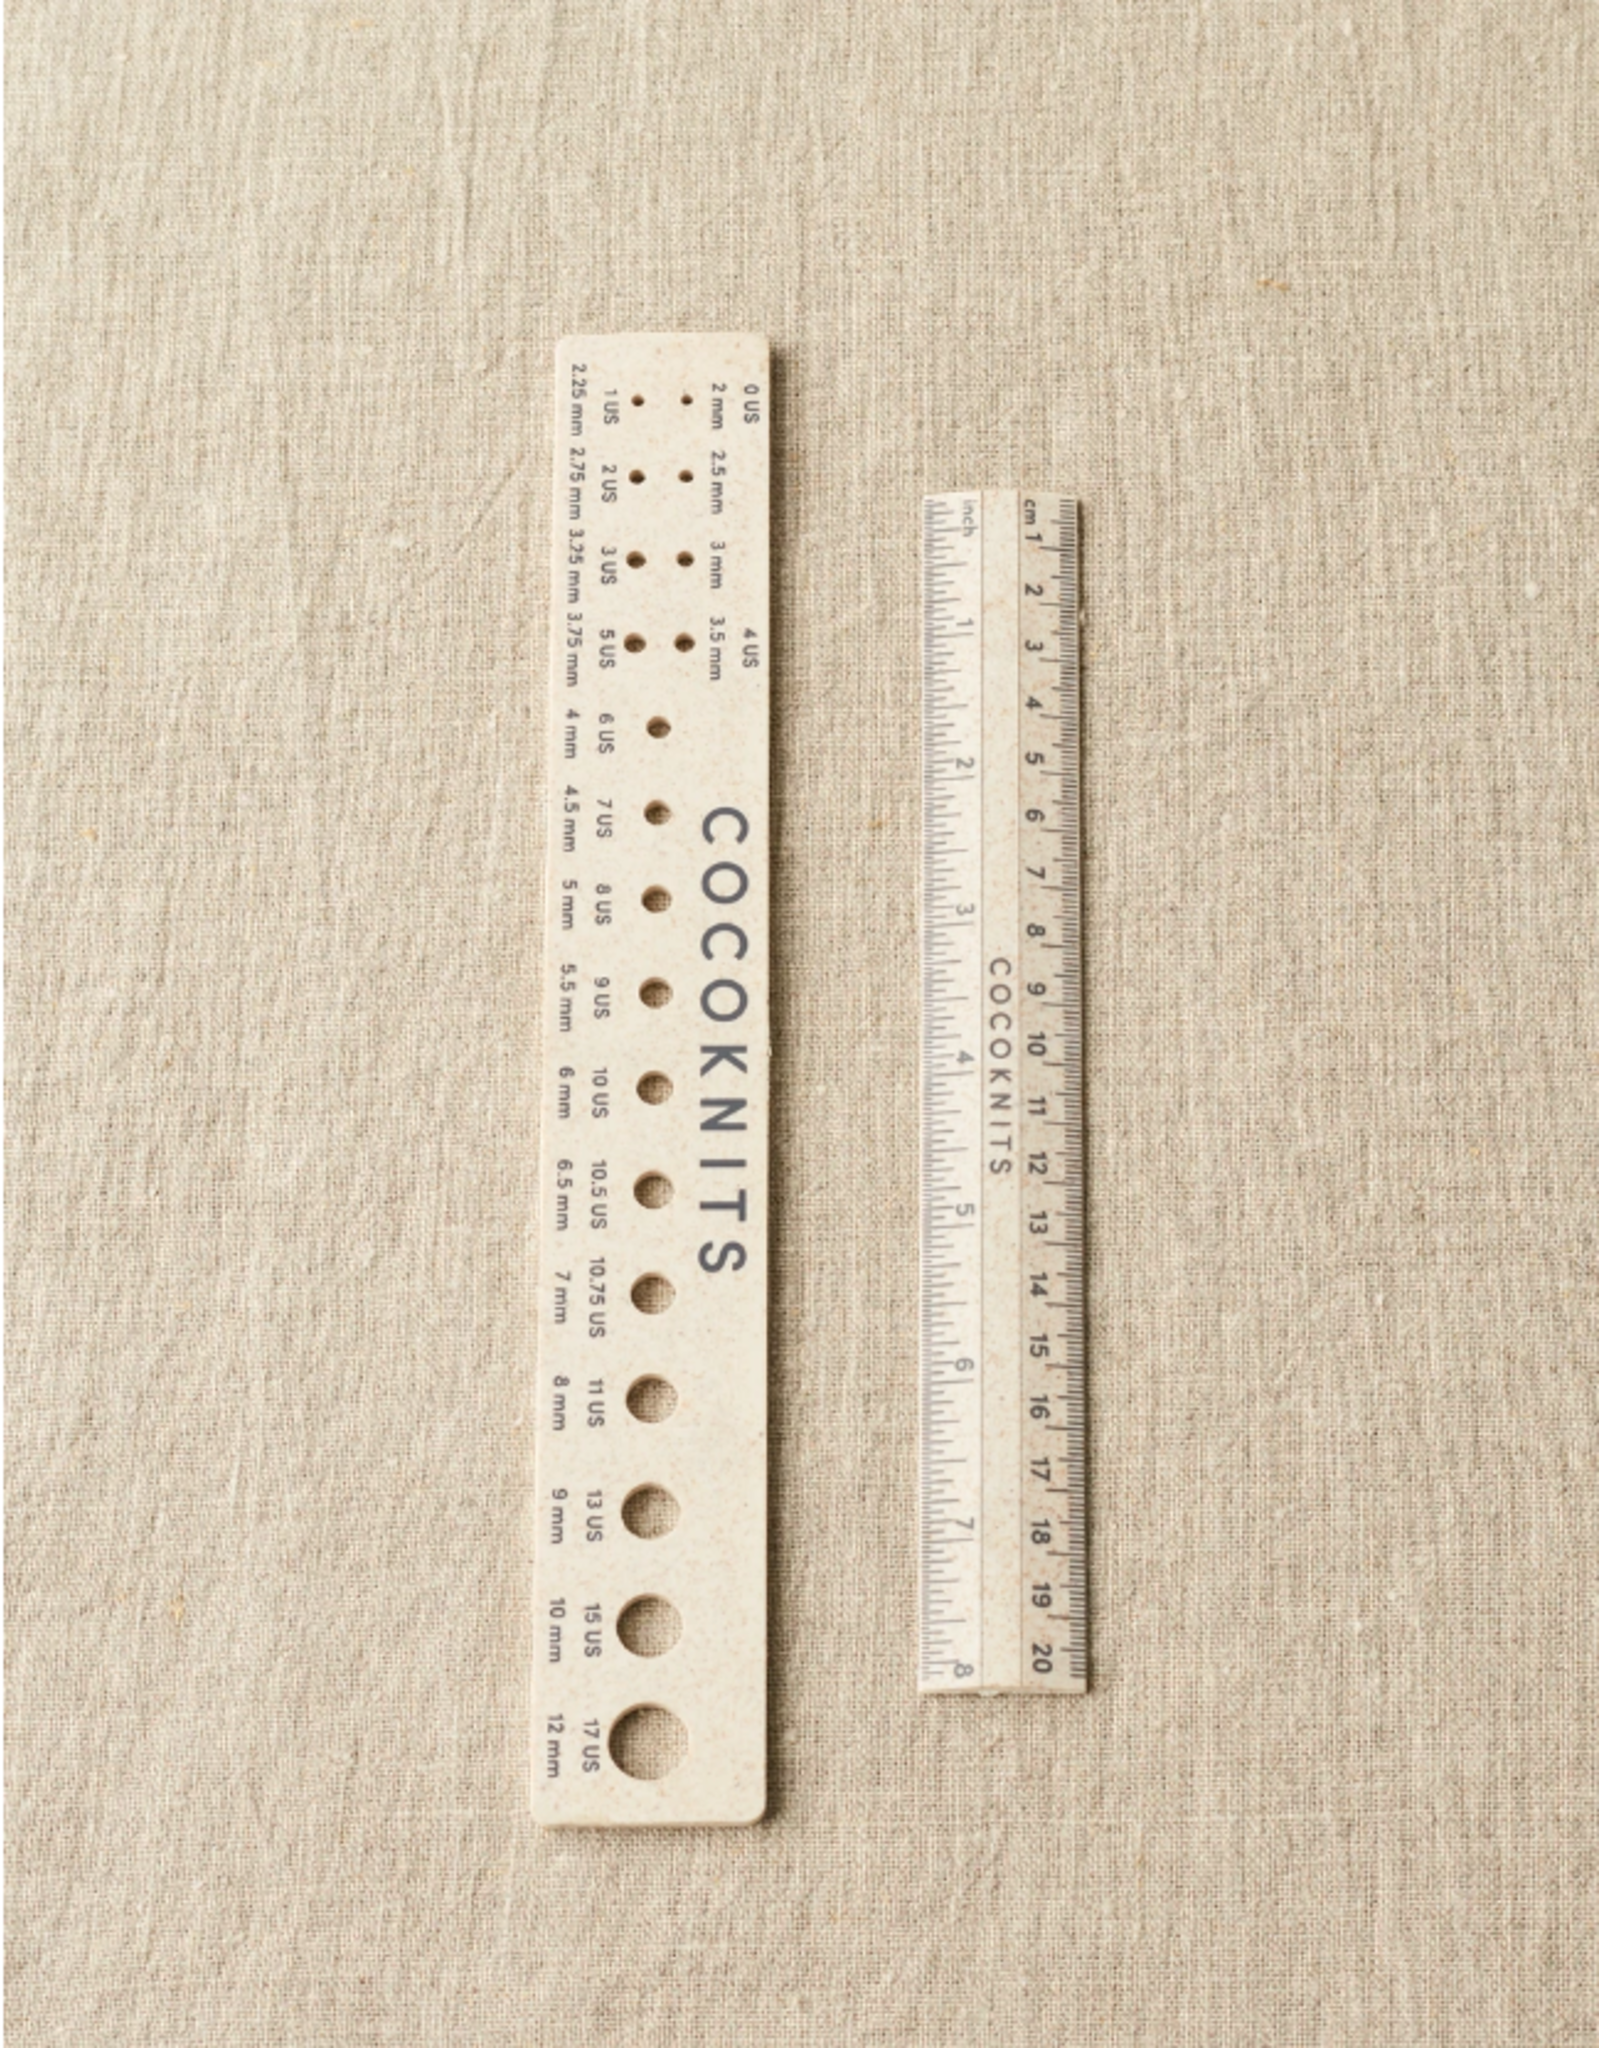 Coco Knits Coco Knits Ruler & Gauge Set